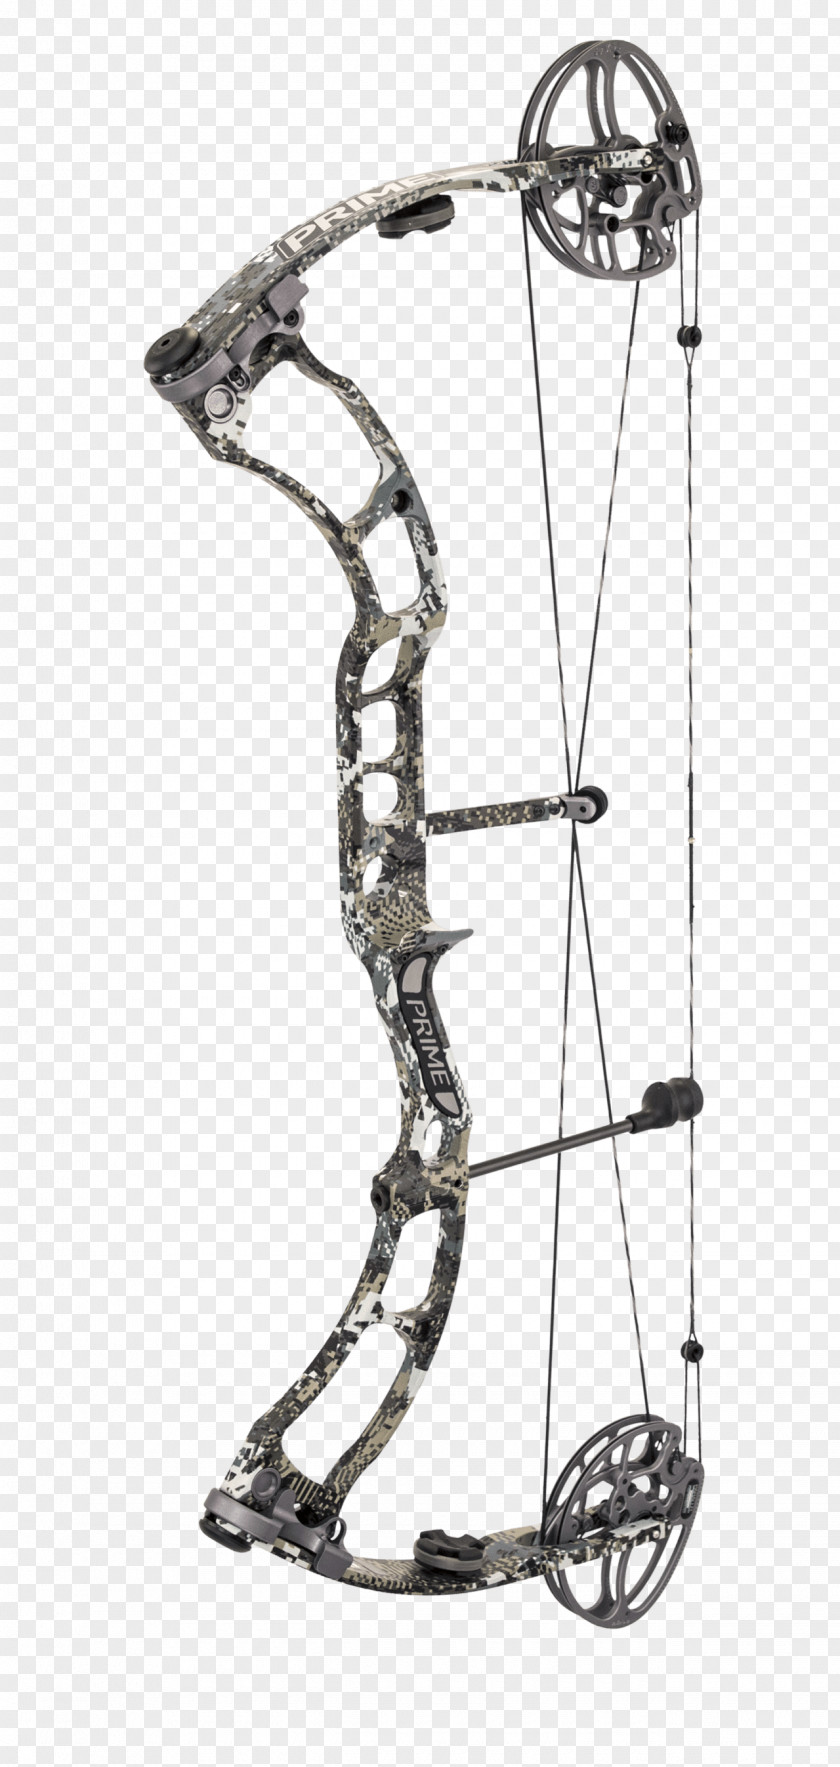 Archery Bow And Arrow Compound Bows Bowhunting PNG